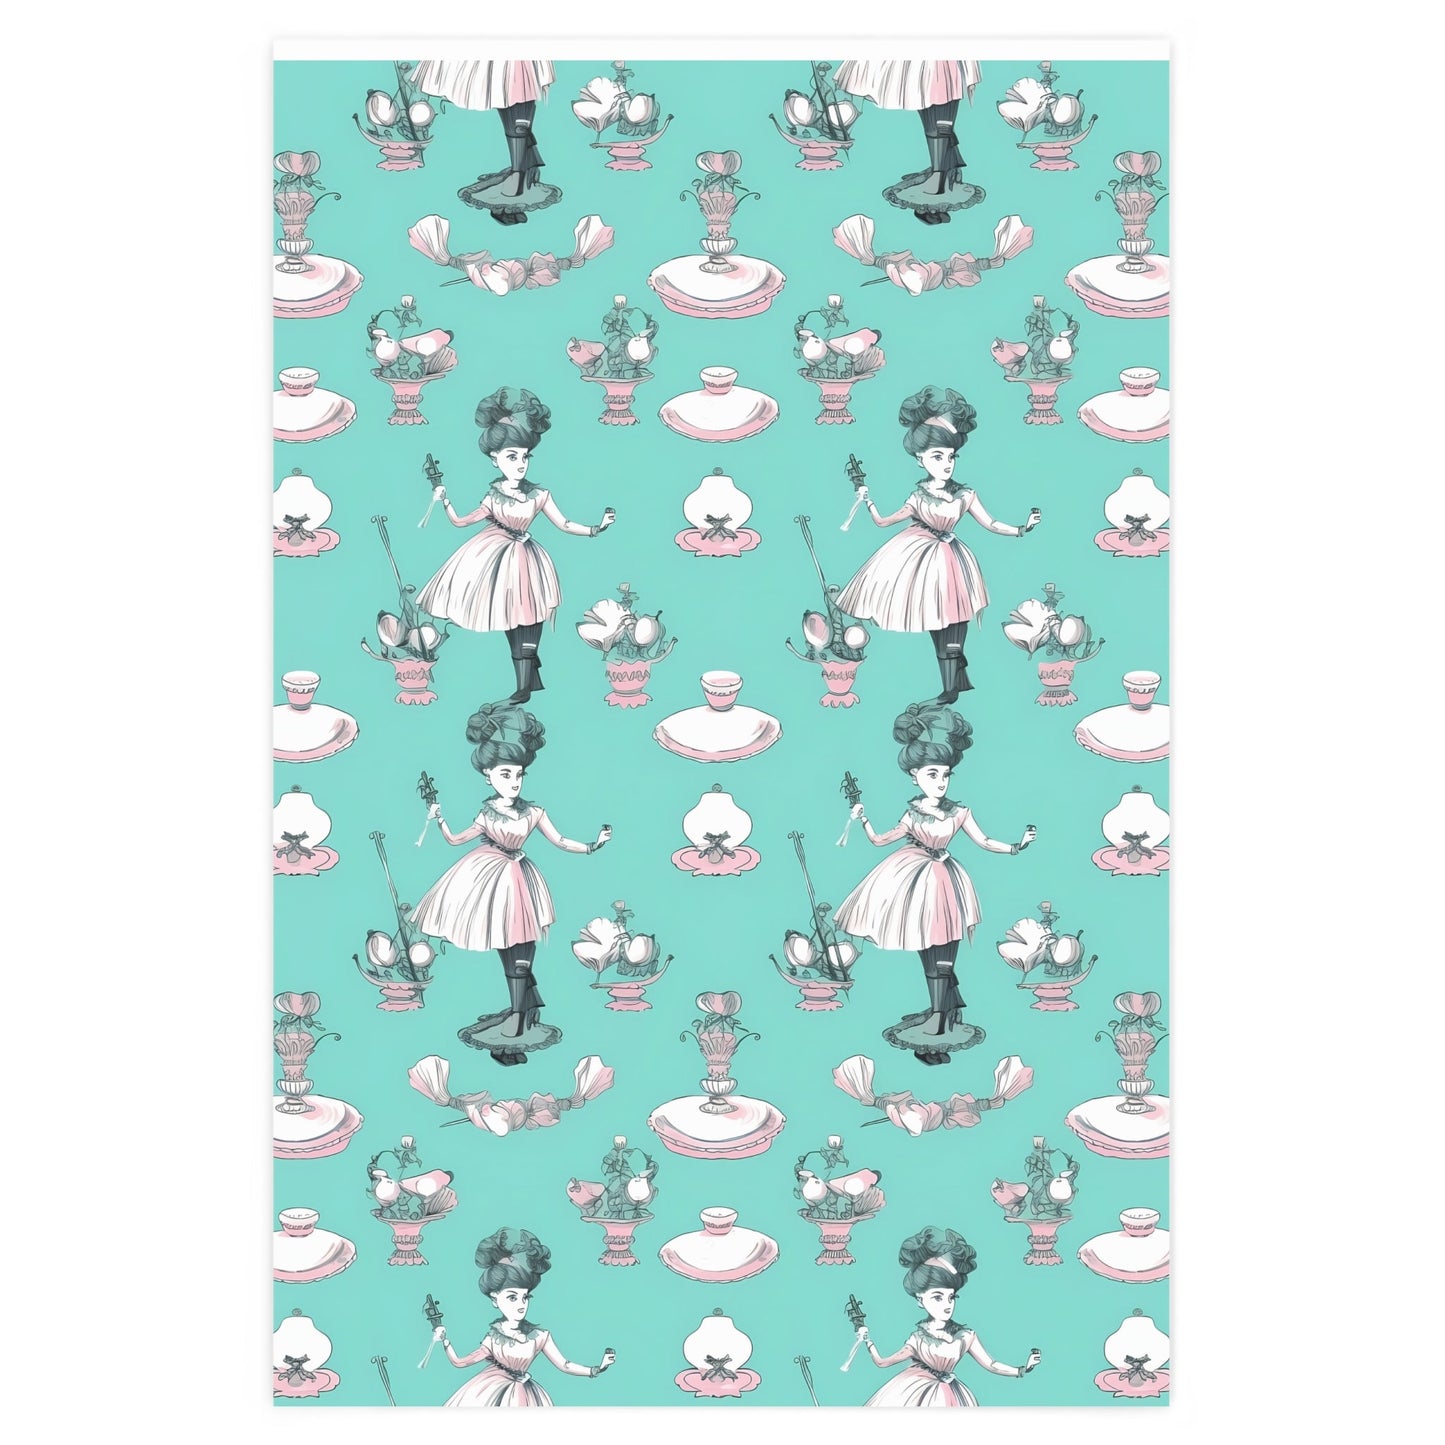 Victorian Woman Teacup Design Wrapping Paper Rolls from The Curated Goose